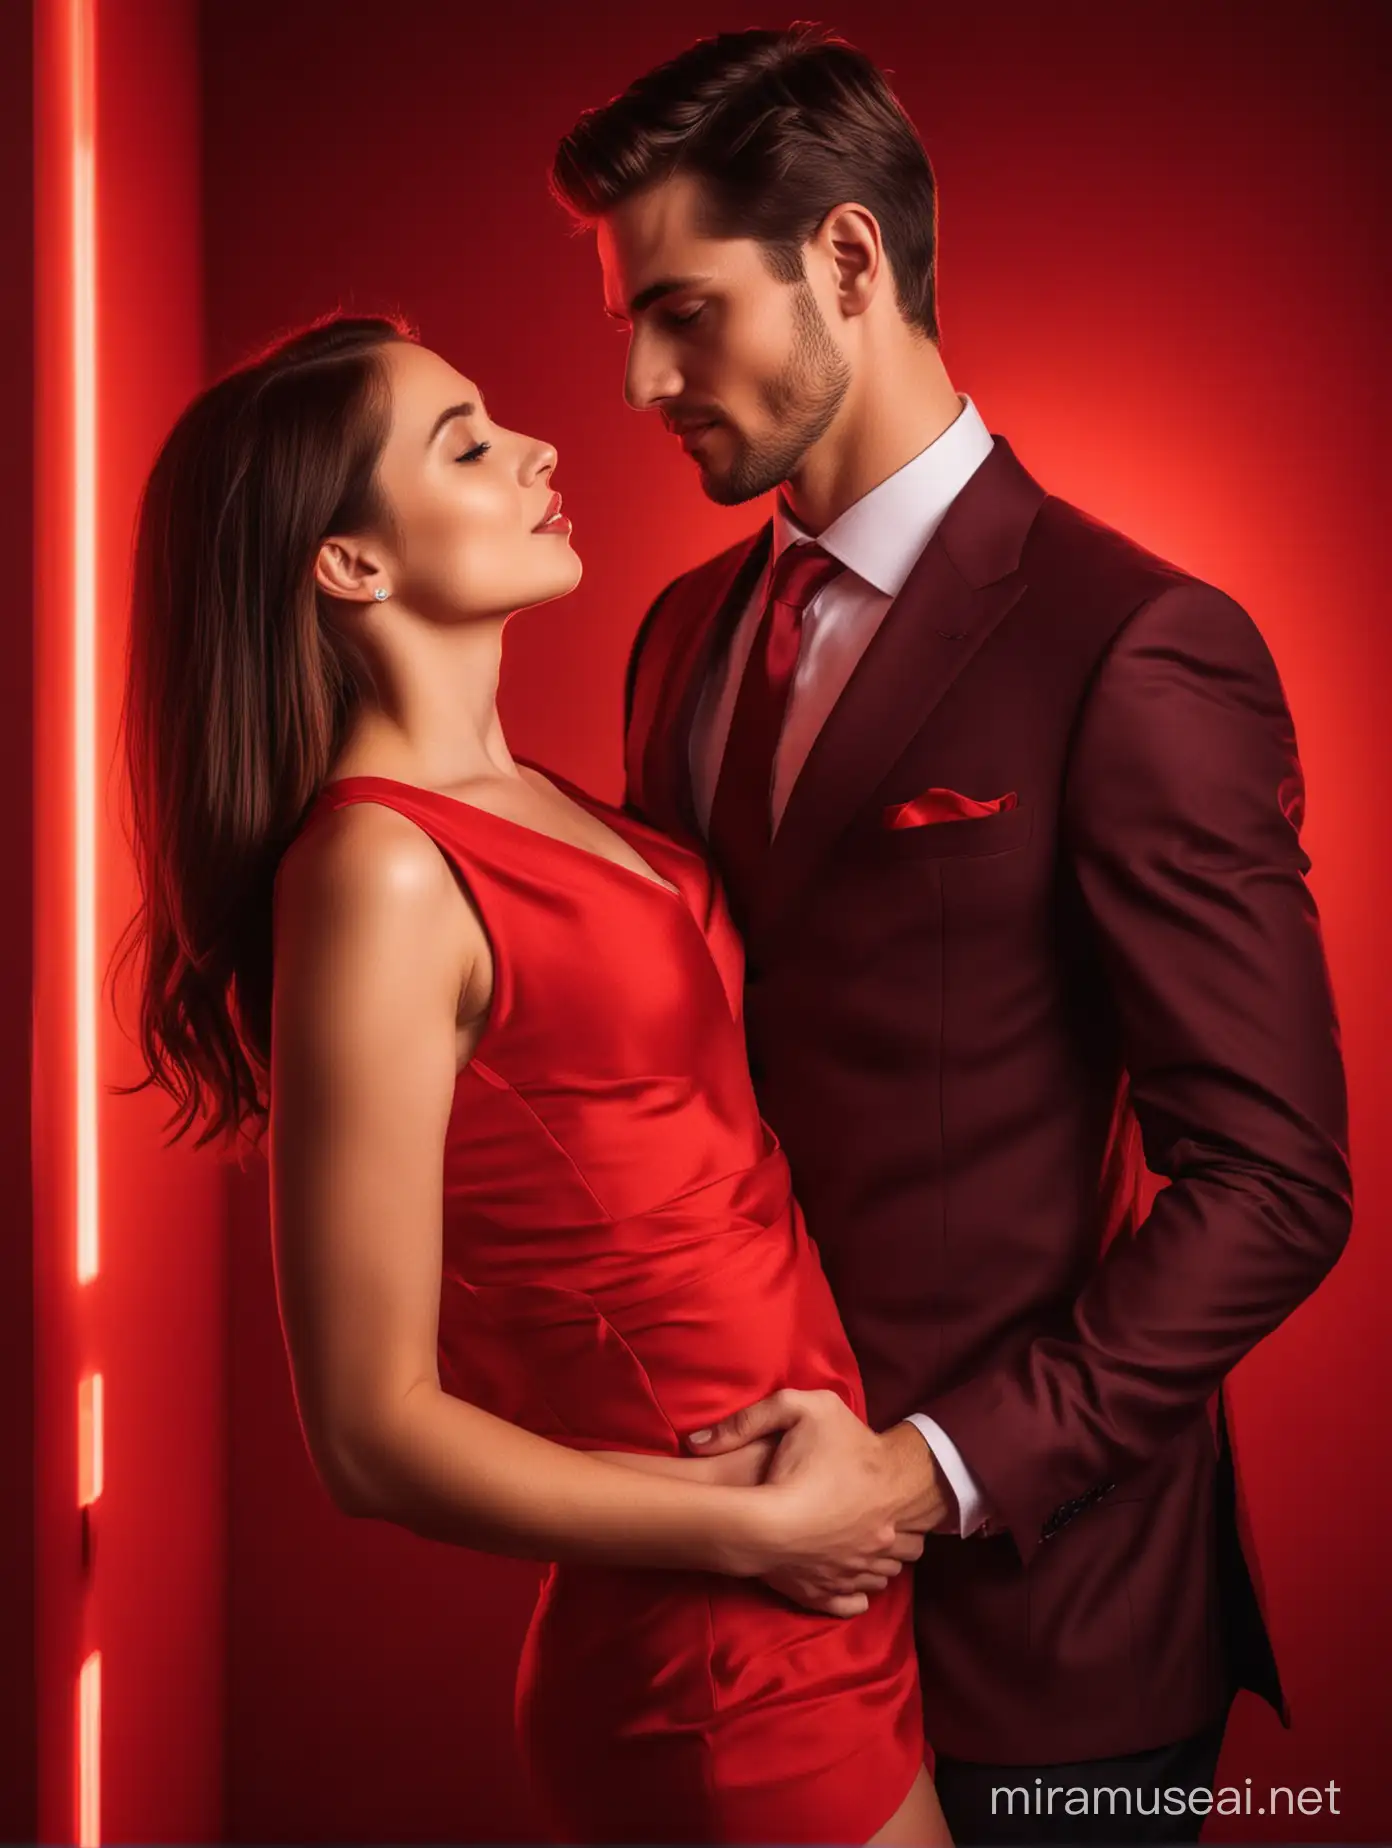 A hot beautiful lady in a fitted red dress, held romantically by a handsome young man in suit, with a beautiful luminous red light behind them.